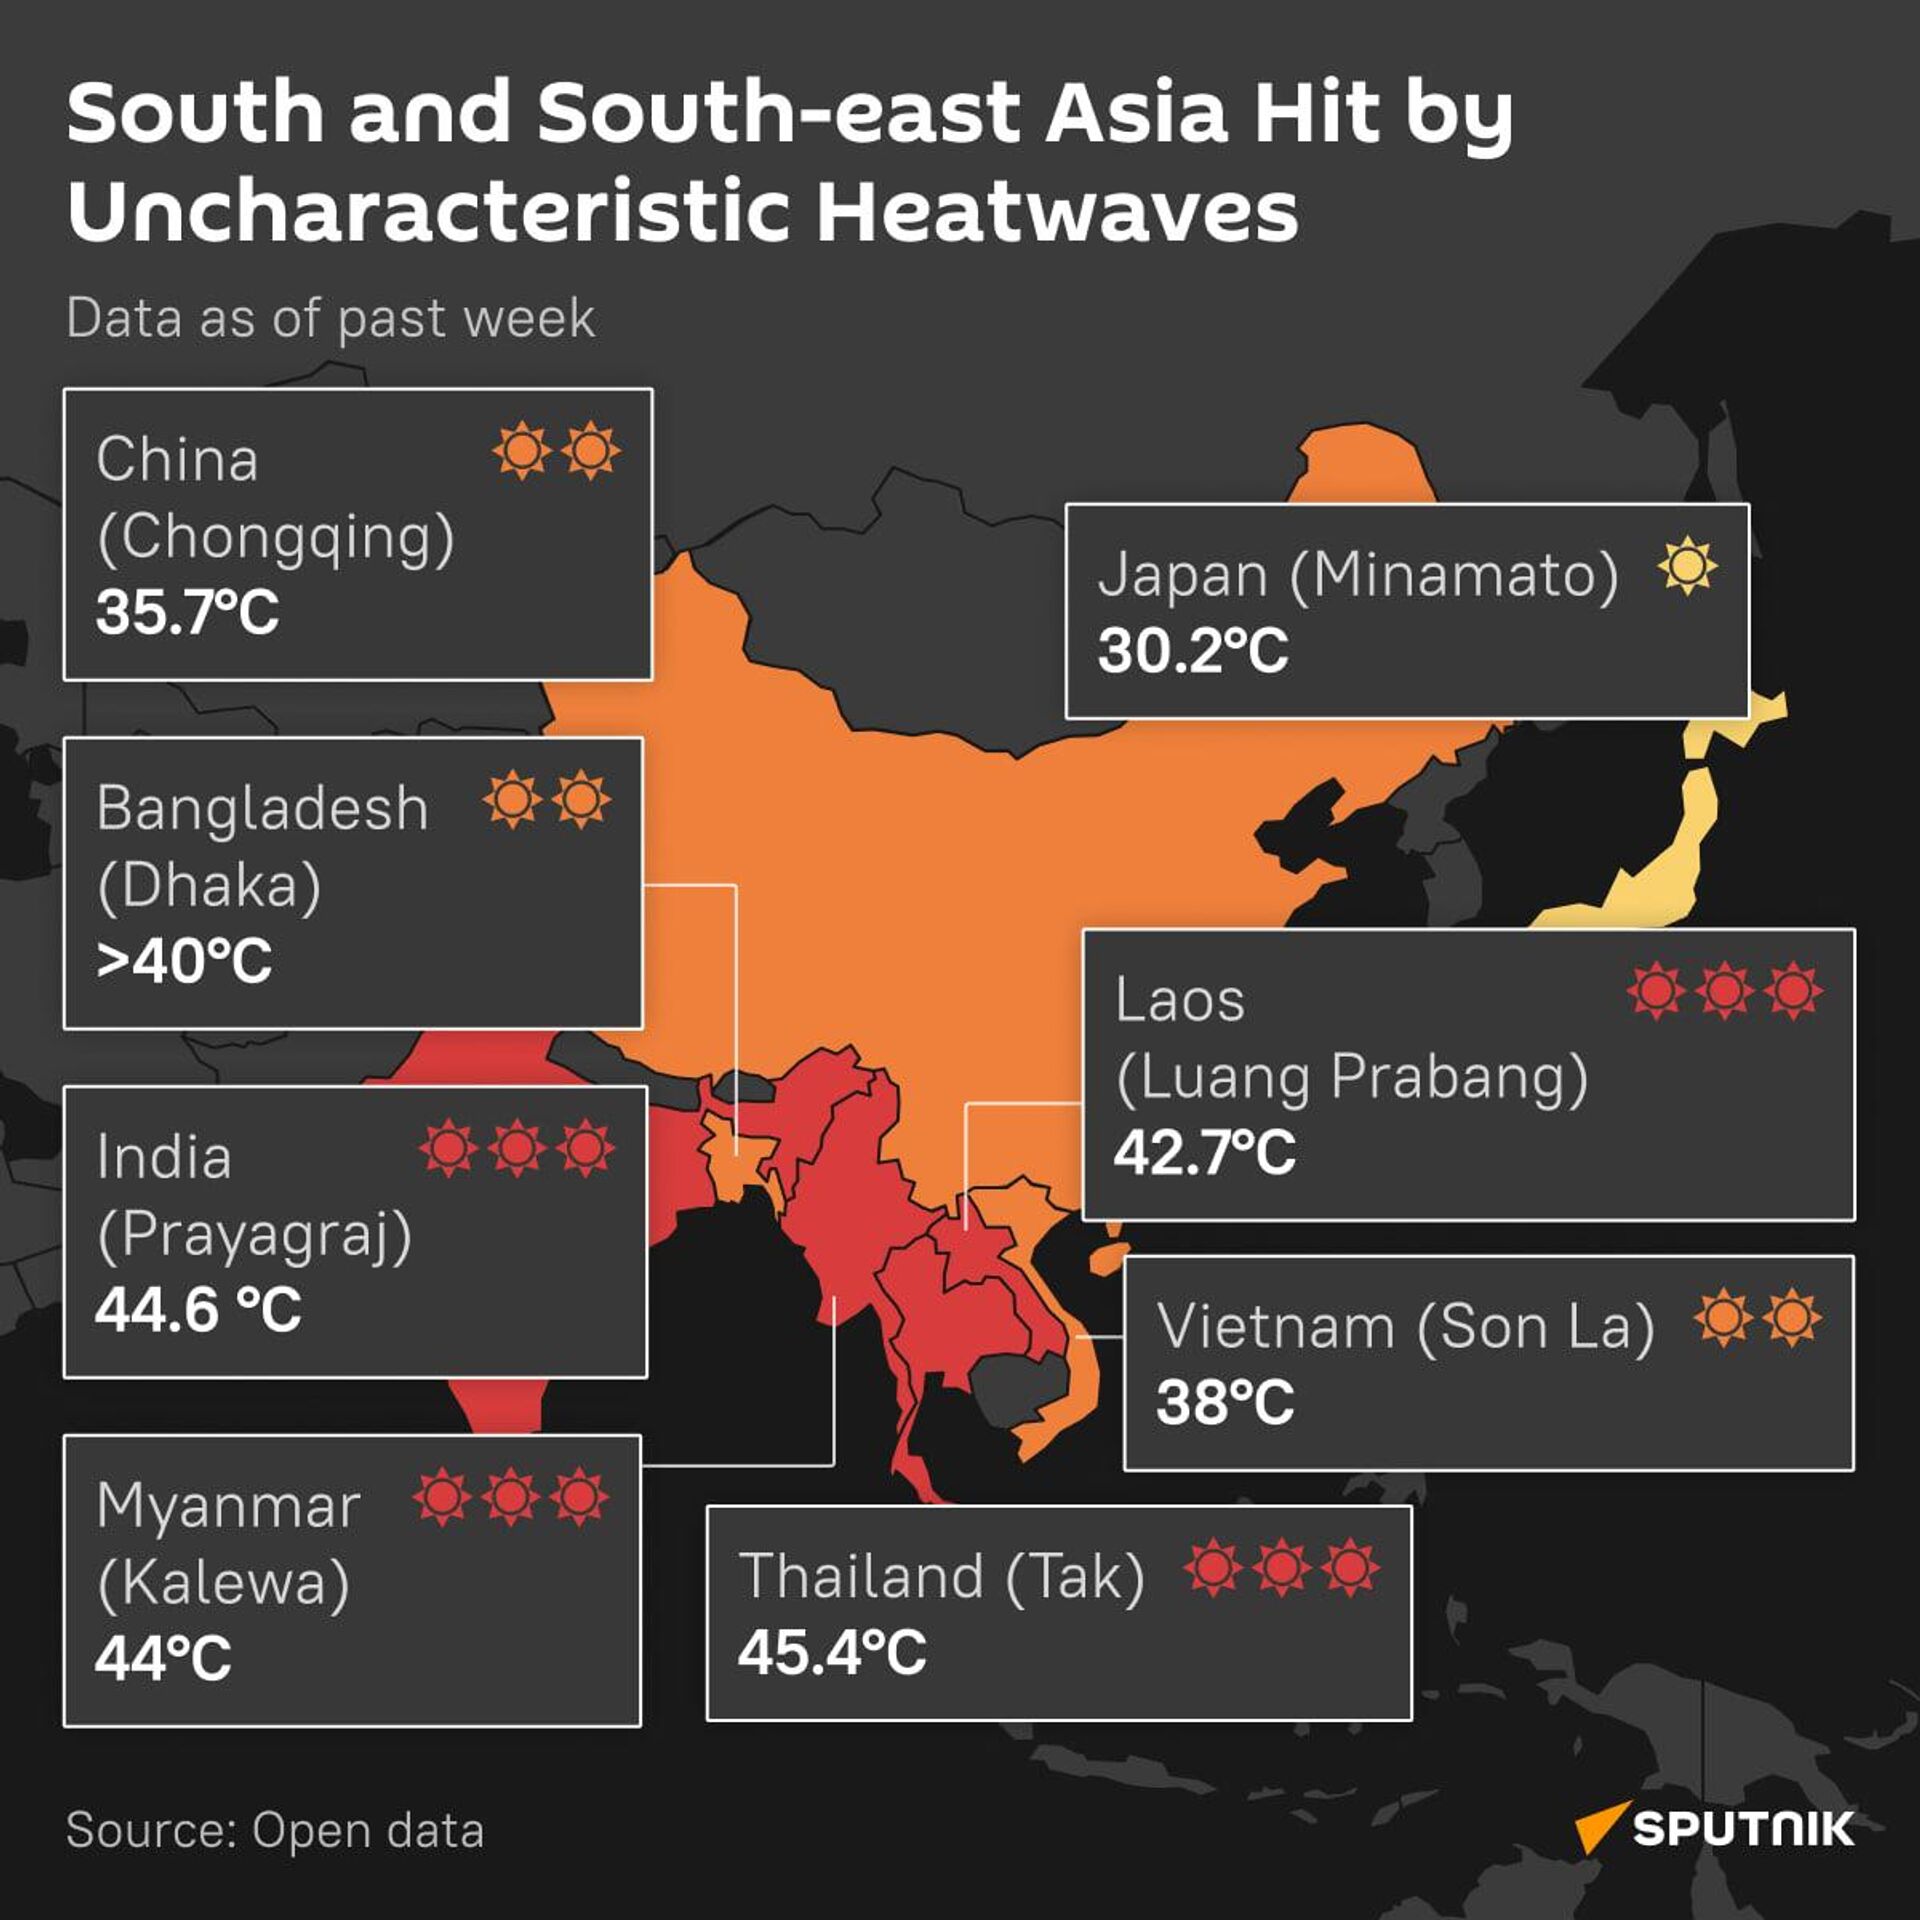 South and Southeast Asia Hit by Uncharacteristic Heatwaves 21.04.2023, Sputnik India